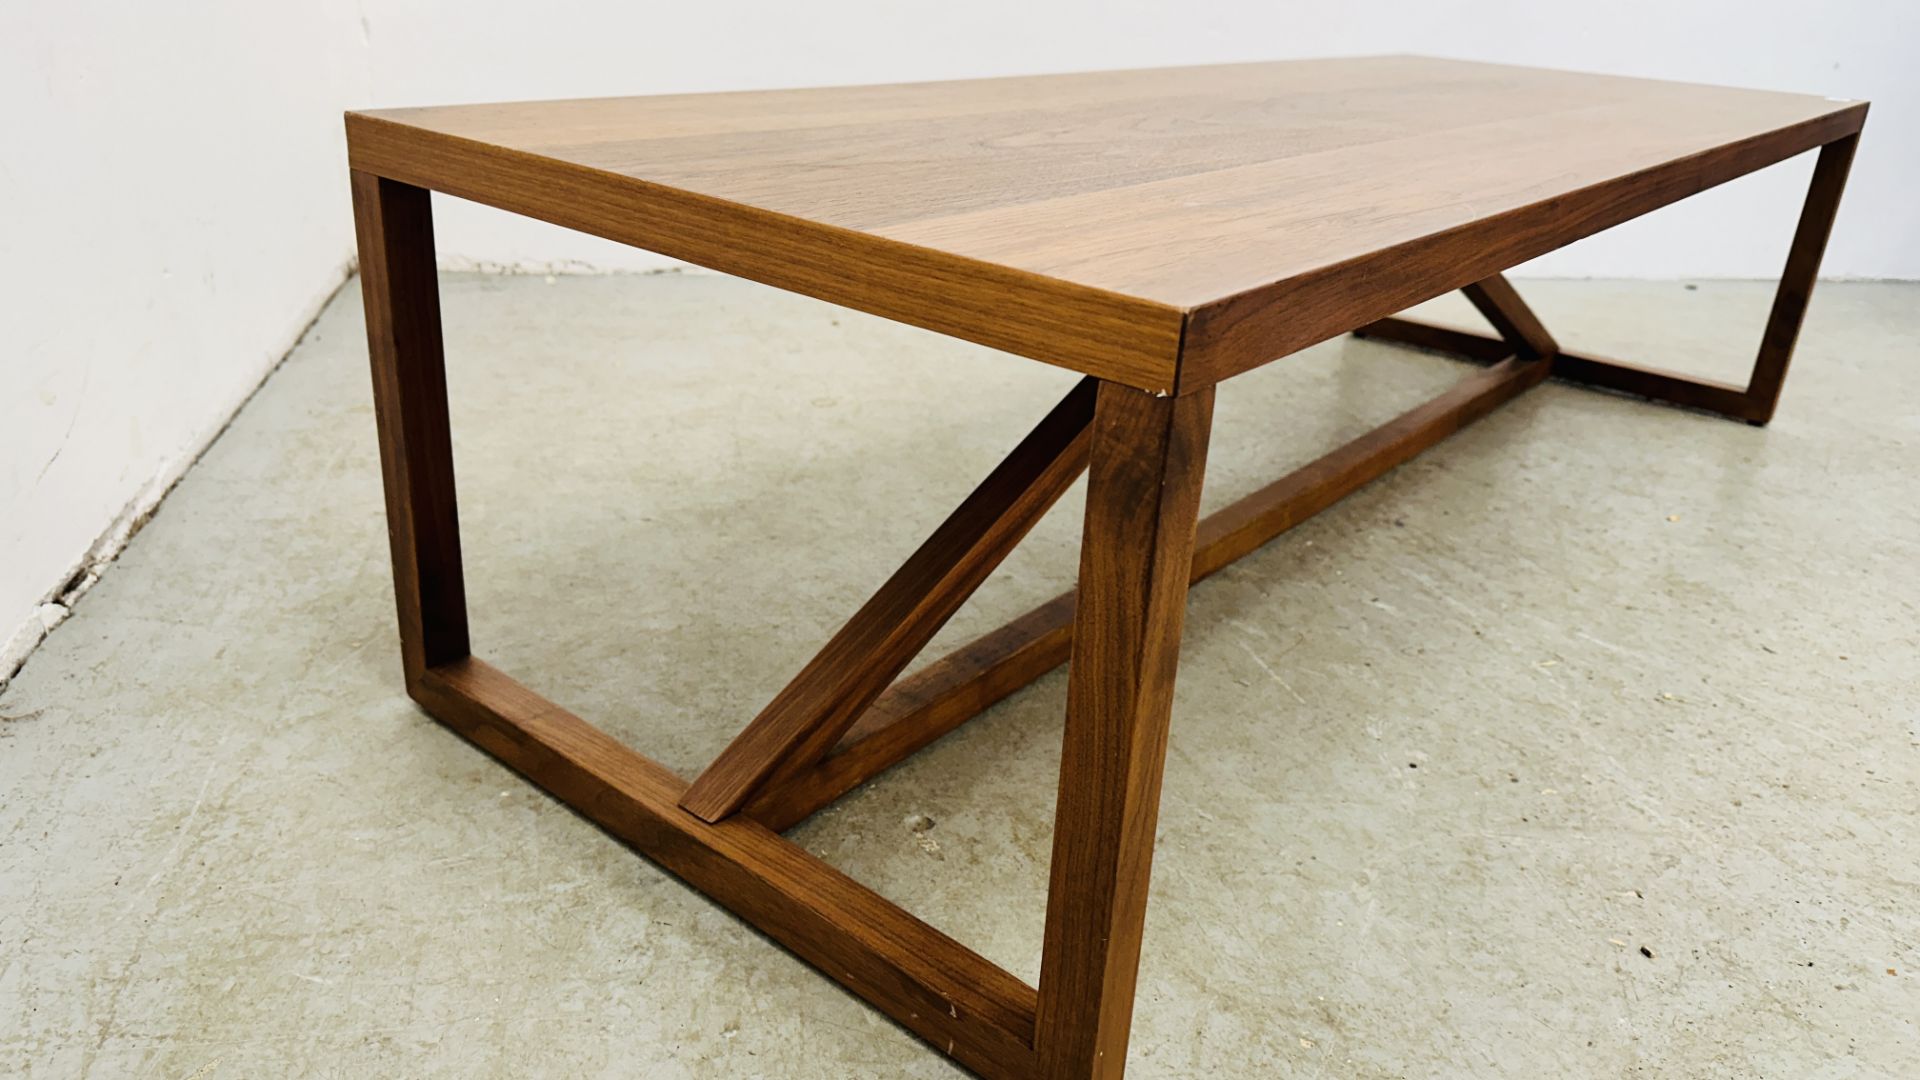 A MODERN STRUT COFFEE TABLE H 35CM X D 51CM X L 137CM. - Image 2 of 7